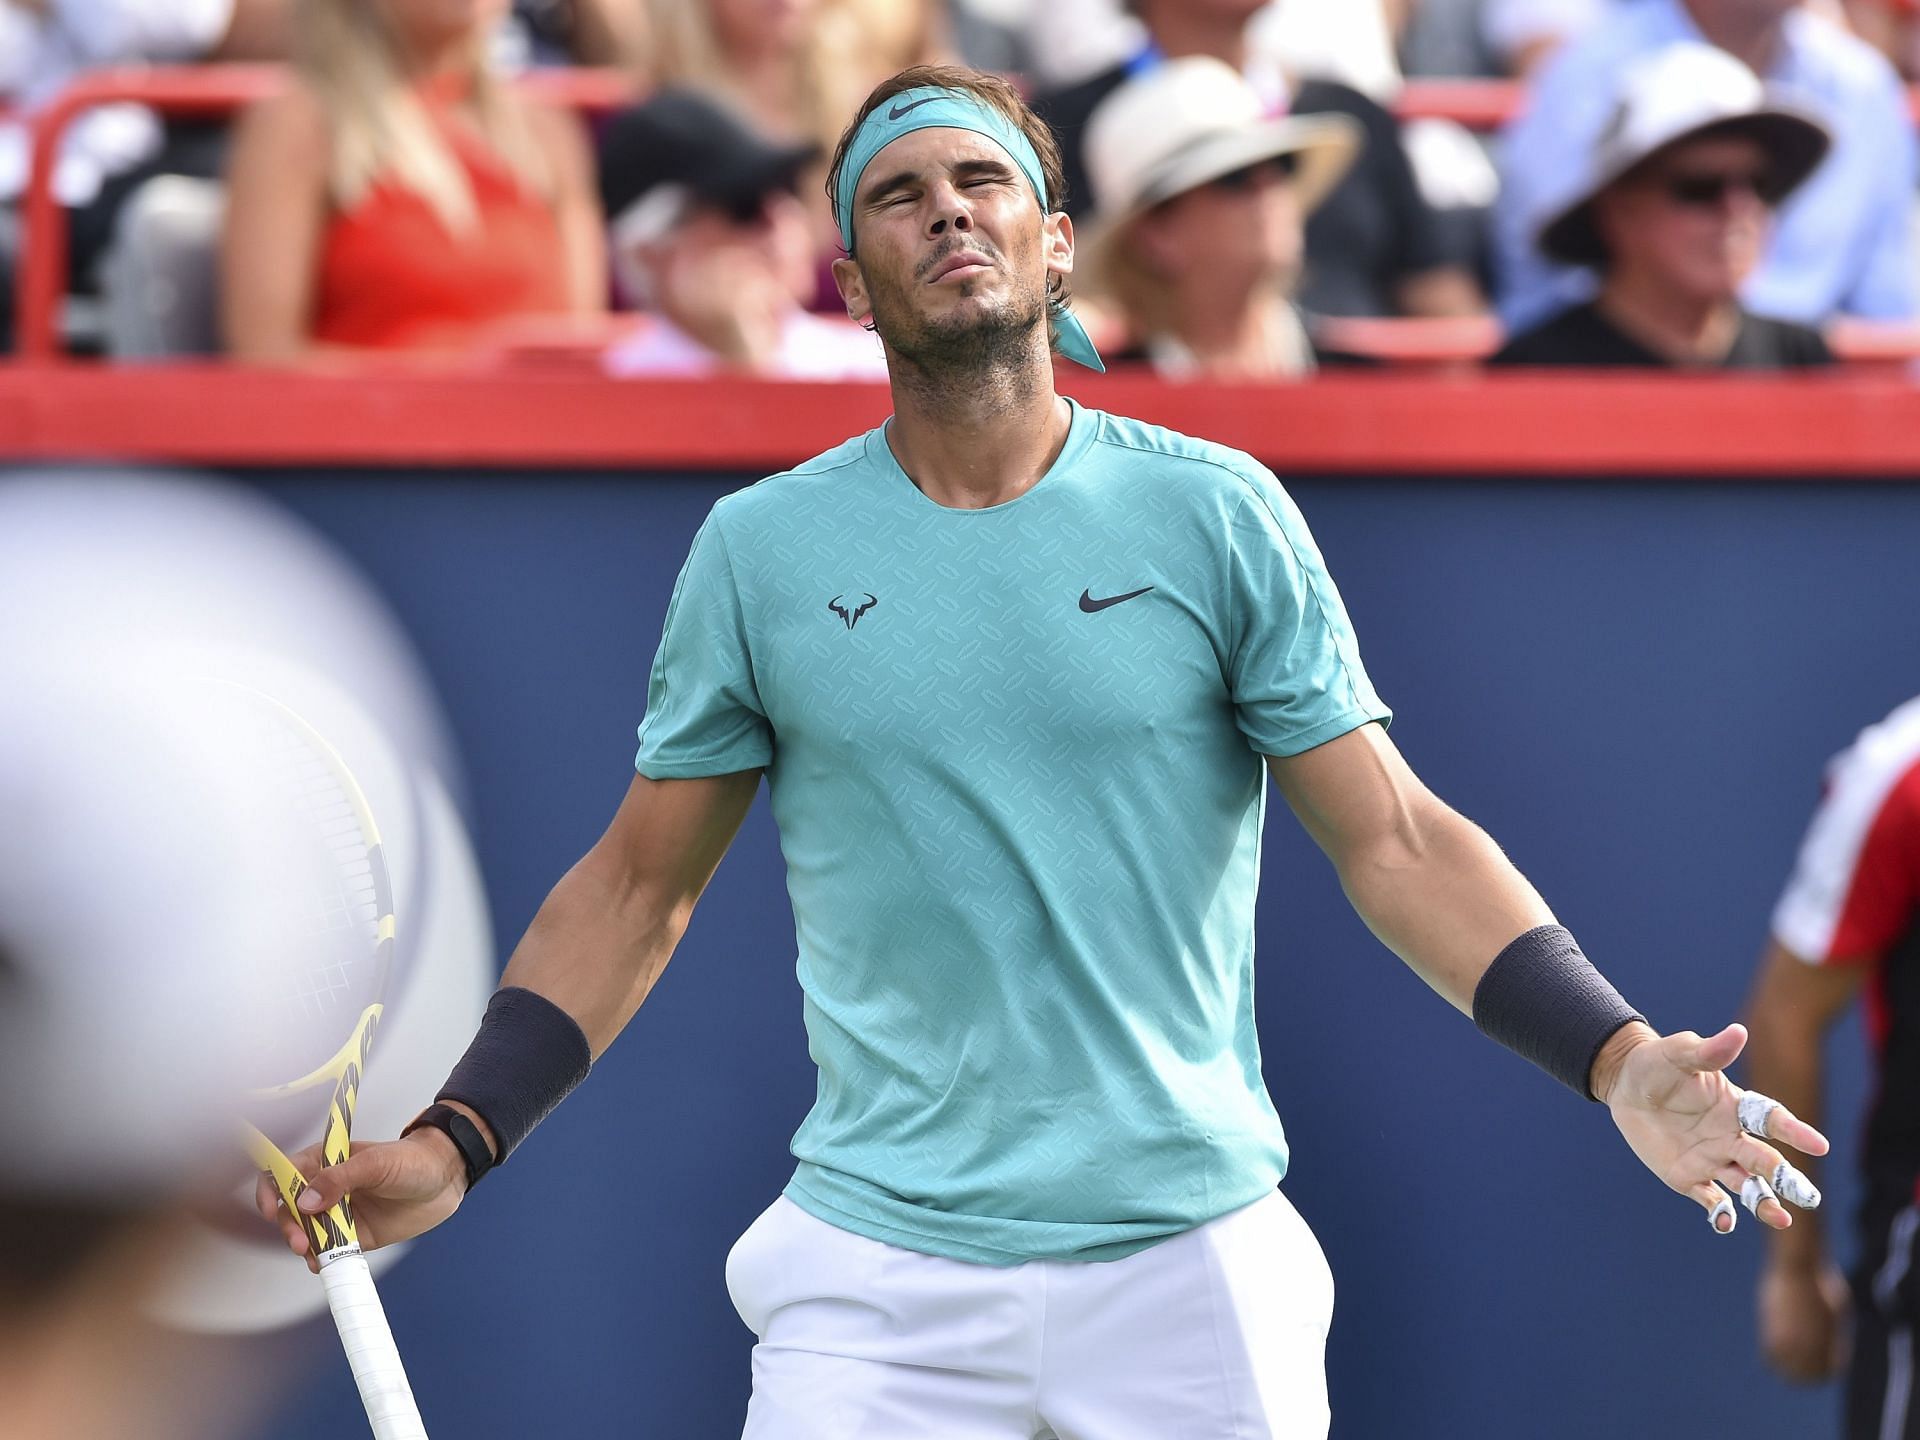 The Spaniard made easy work of Medvedev to win the Rogers Cup in 2019